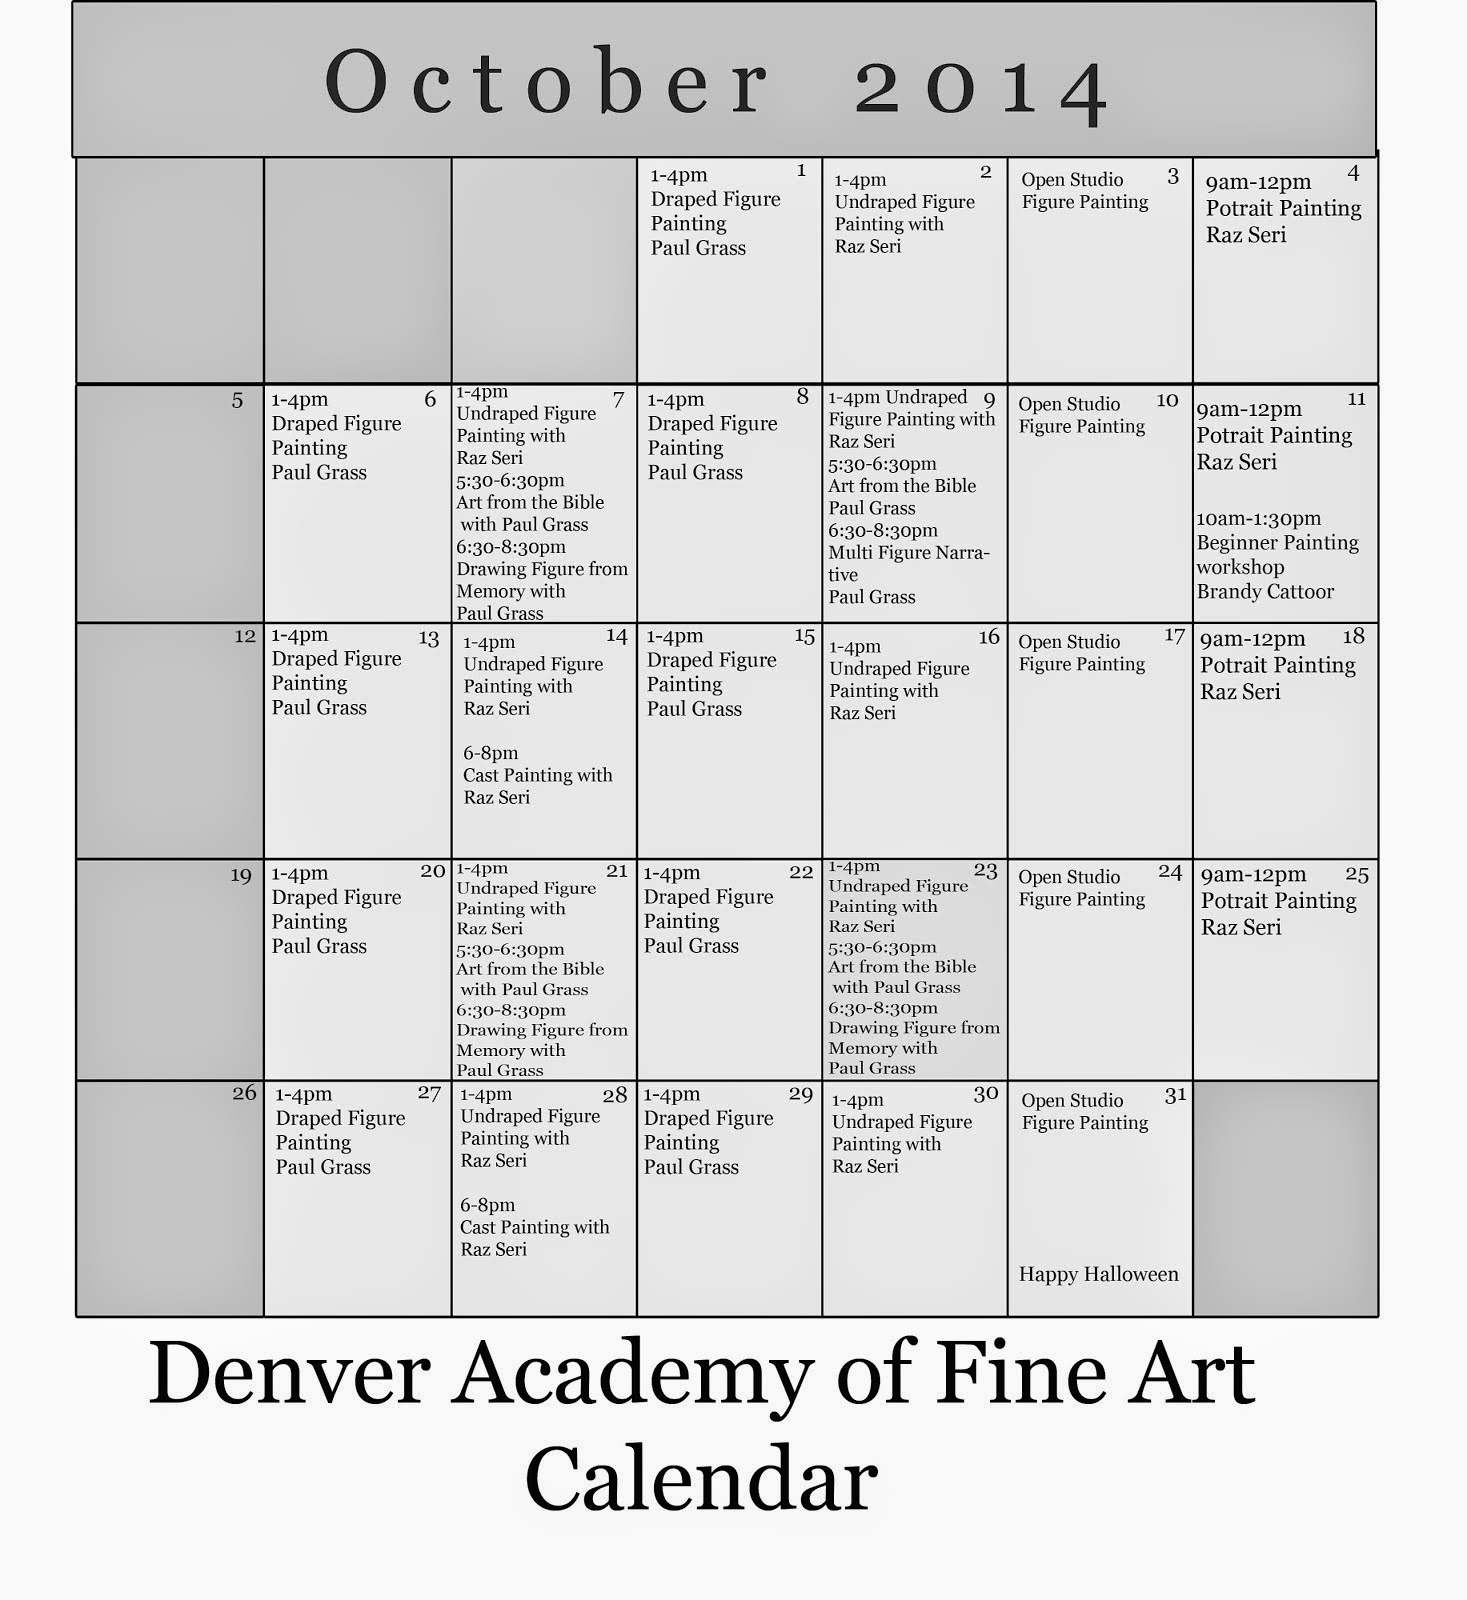 The Denver Academy of Fine Art Core Students